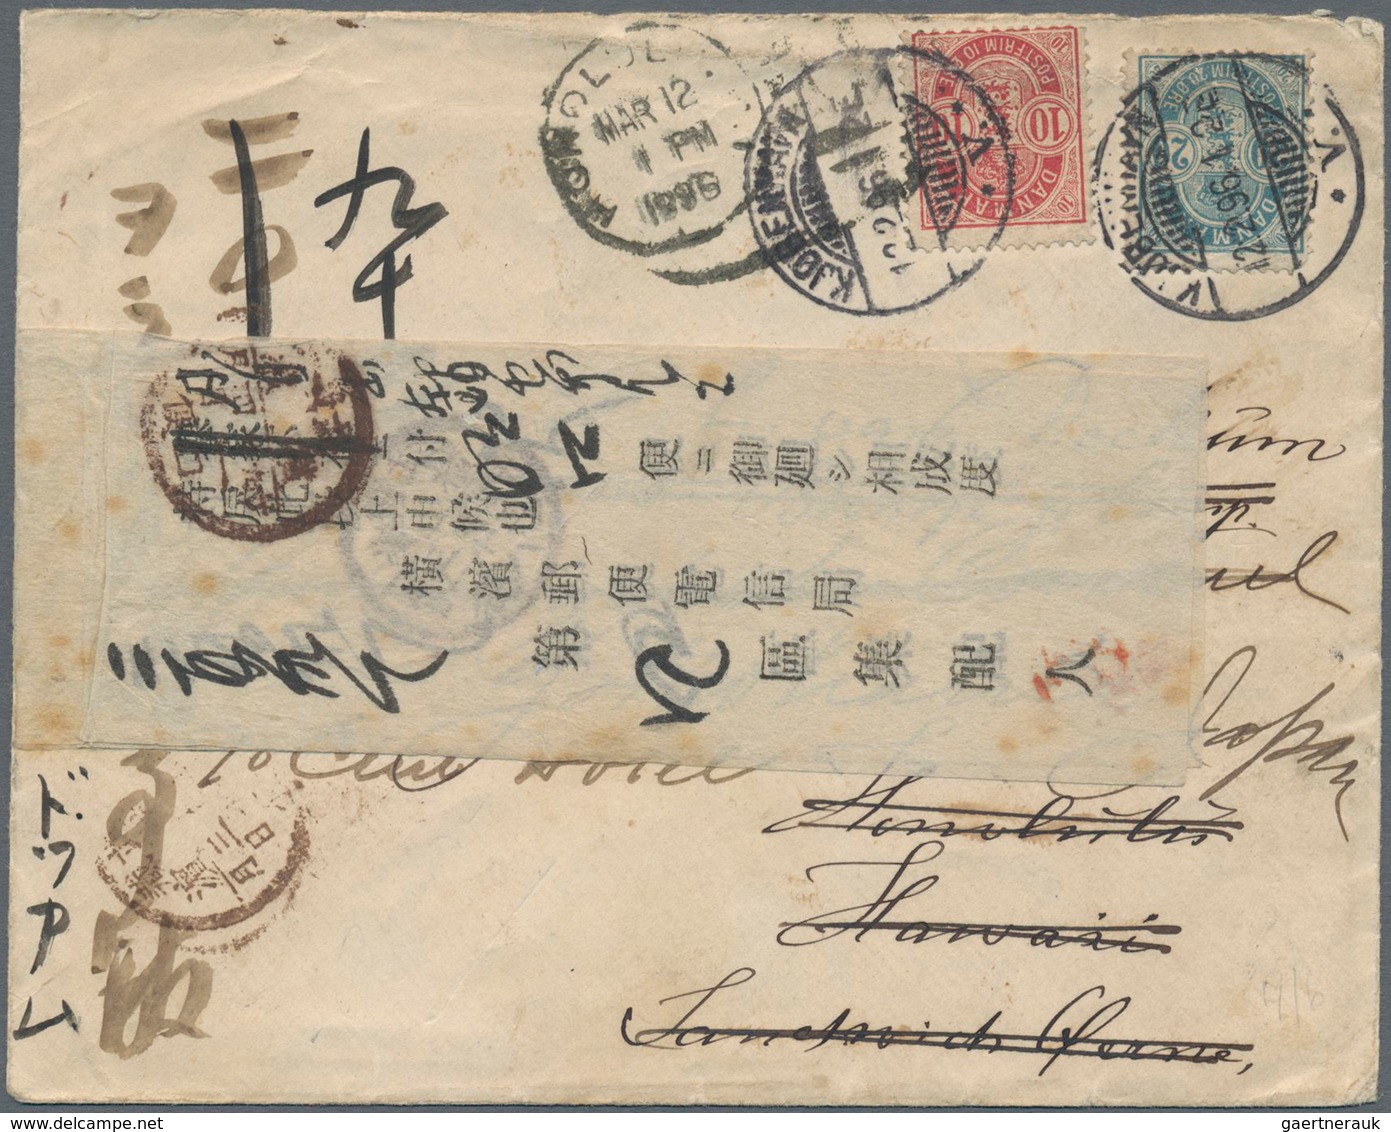 Dänemark: 1896 Destination HAWAII - JAPAN: Cover From Copenhagen To The Danish Consul In Honolulu, H - Used Stamps